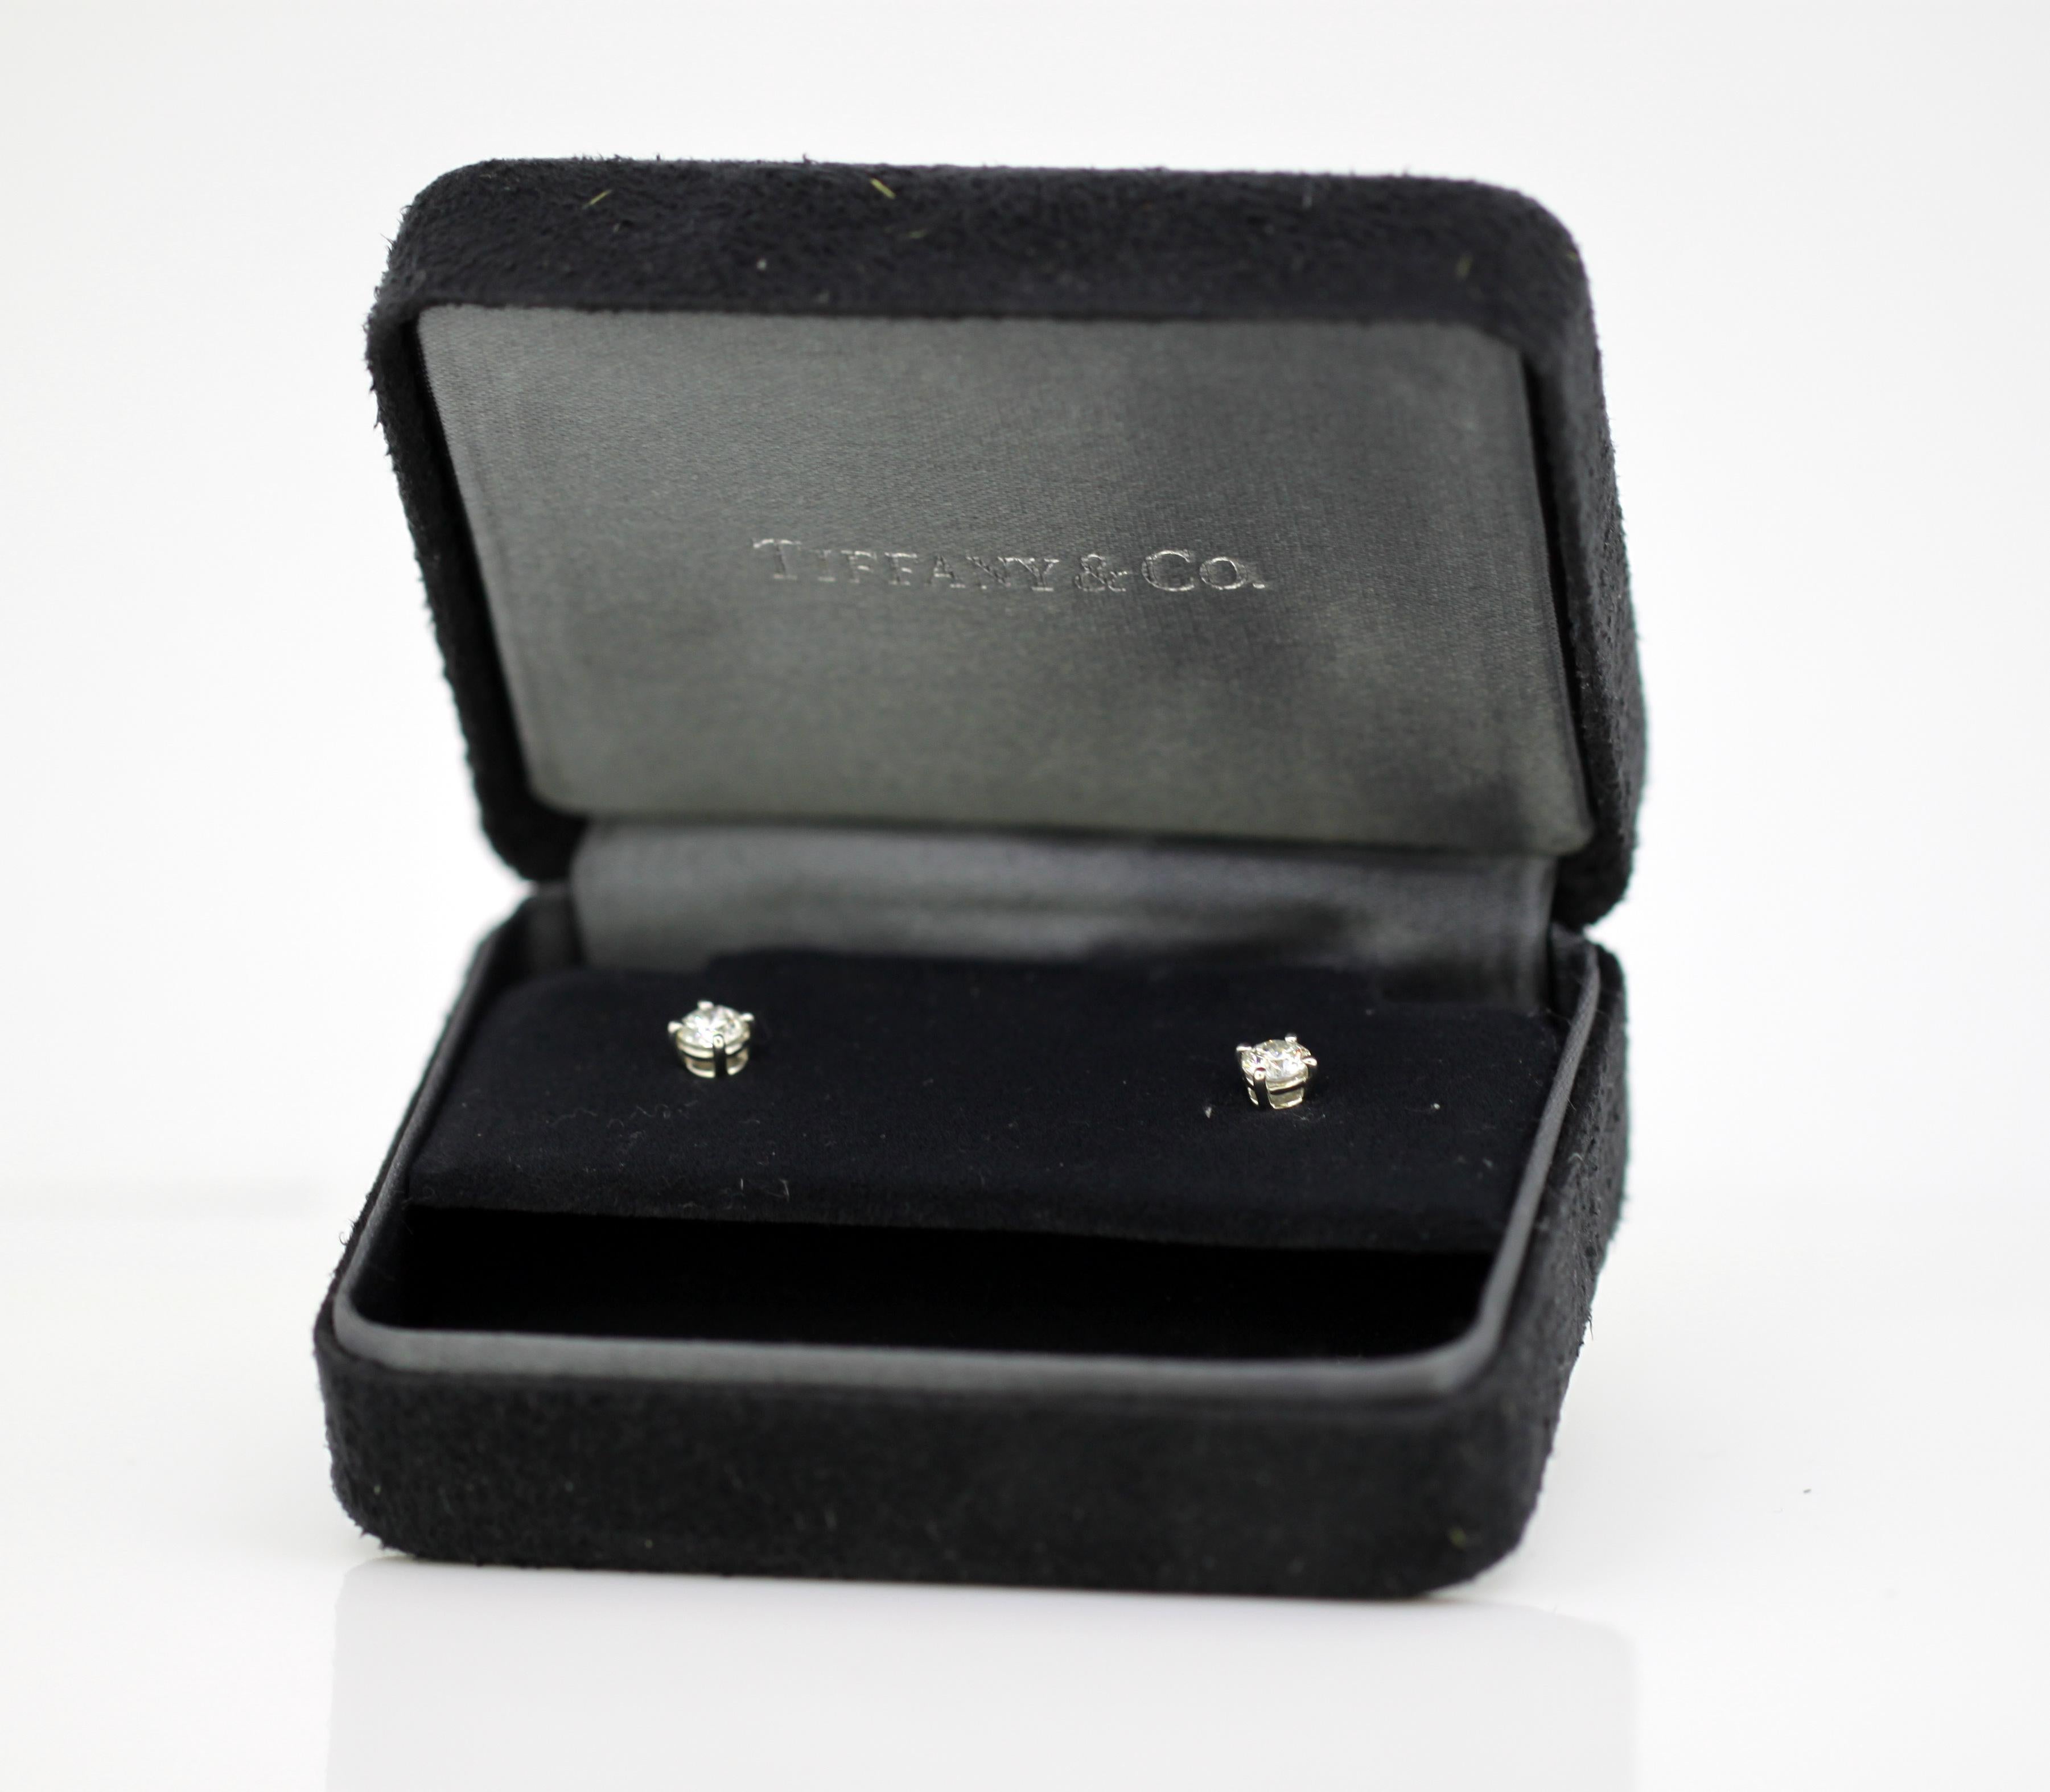 Ladies platinum stud earrings with diamonds. 
Designer : Tiffany & Co 
Made in London 2012 
Fully hallmarked. 

Approx Dimensions - 
Earring Size ( Length x Width ) : 1.5 x 0.6 cm 
Weight: 2 grams 

Diamond - 
Cut : Brilliant 
Colour : E/F 
Clarity